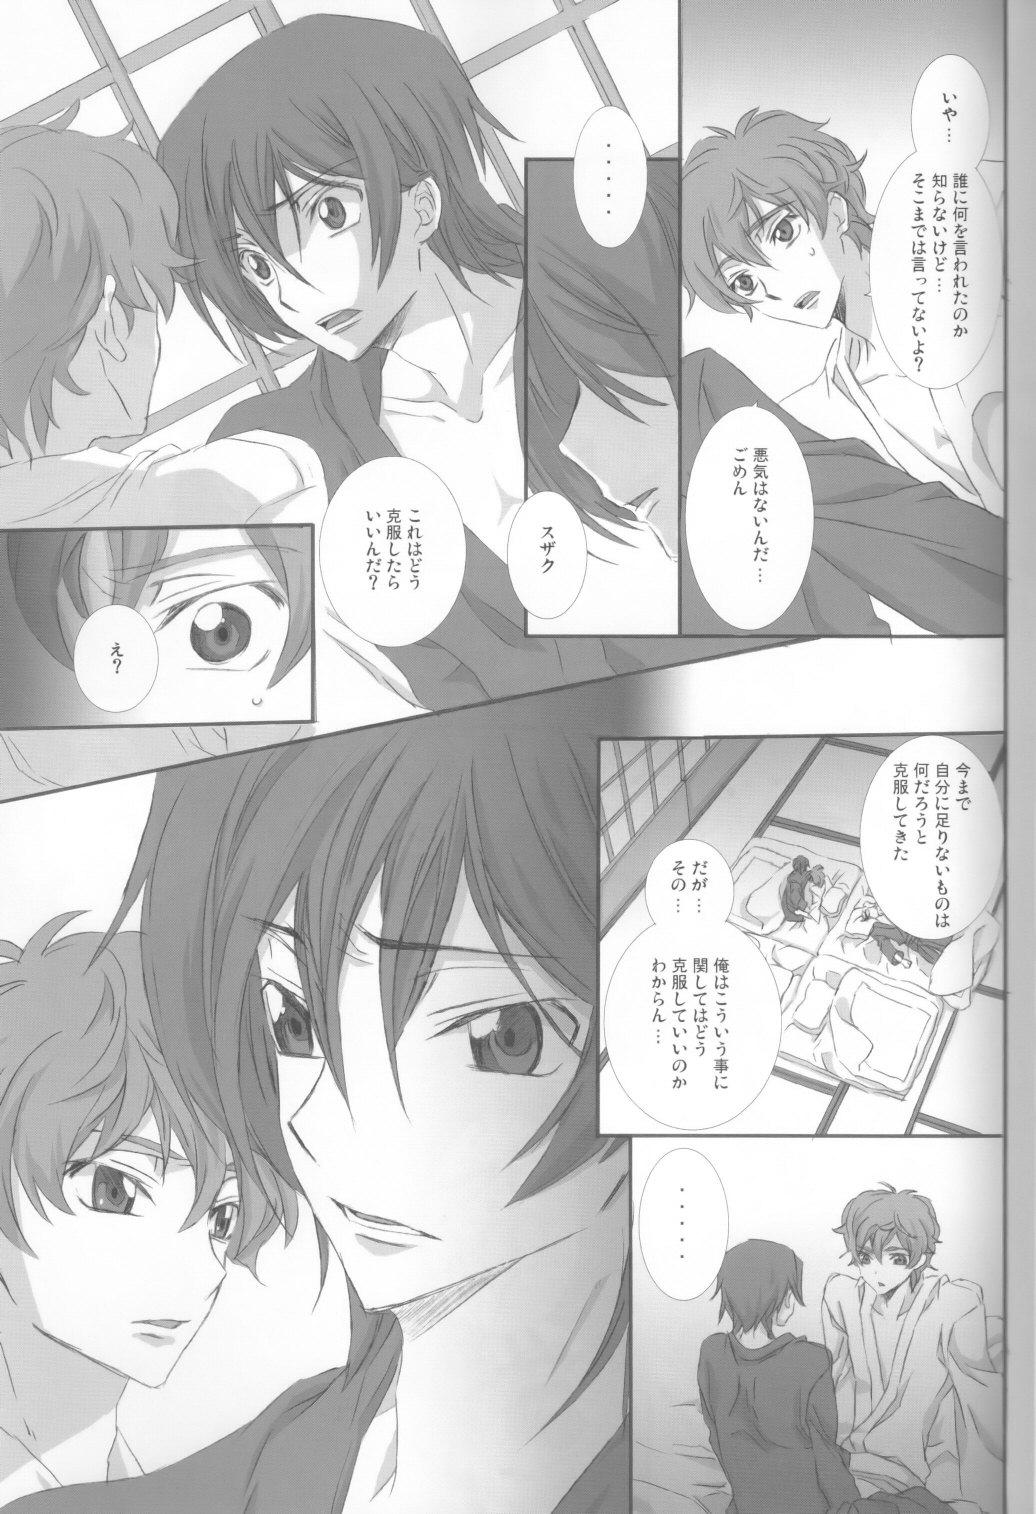 Orgy on・non・om - Code geass Pussyeating - Page 12